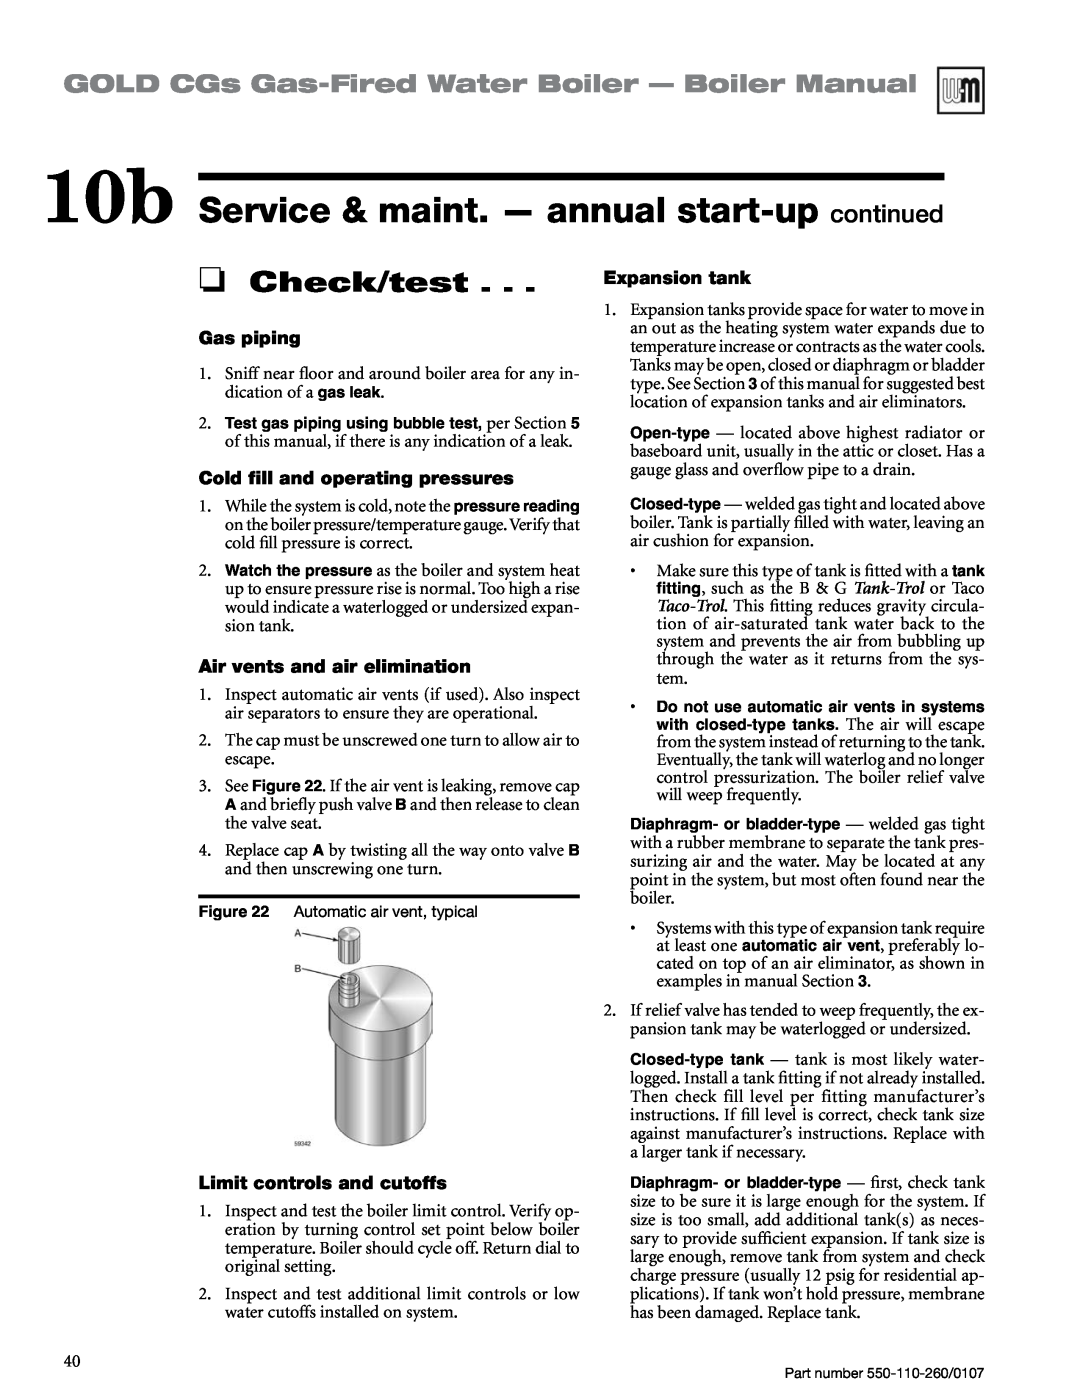 Weil-McLain 550-110-260/0107 10b Service & maint. — annual start-up continued, Check/test, Gas piping, Expansion tank 